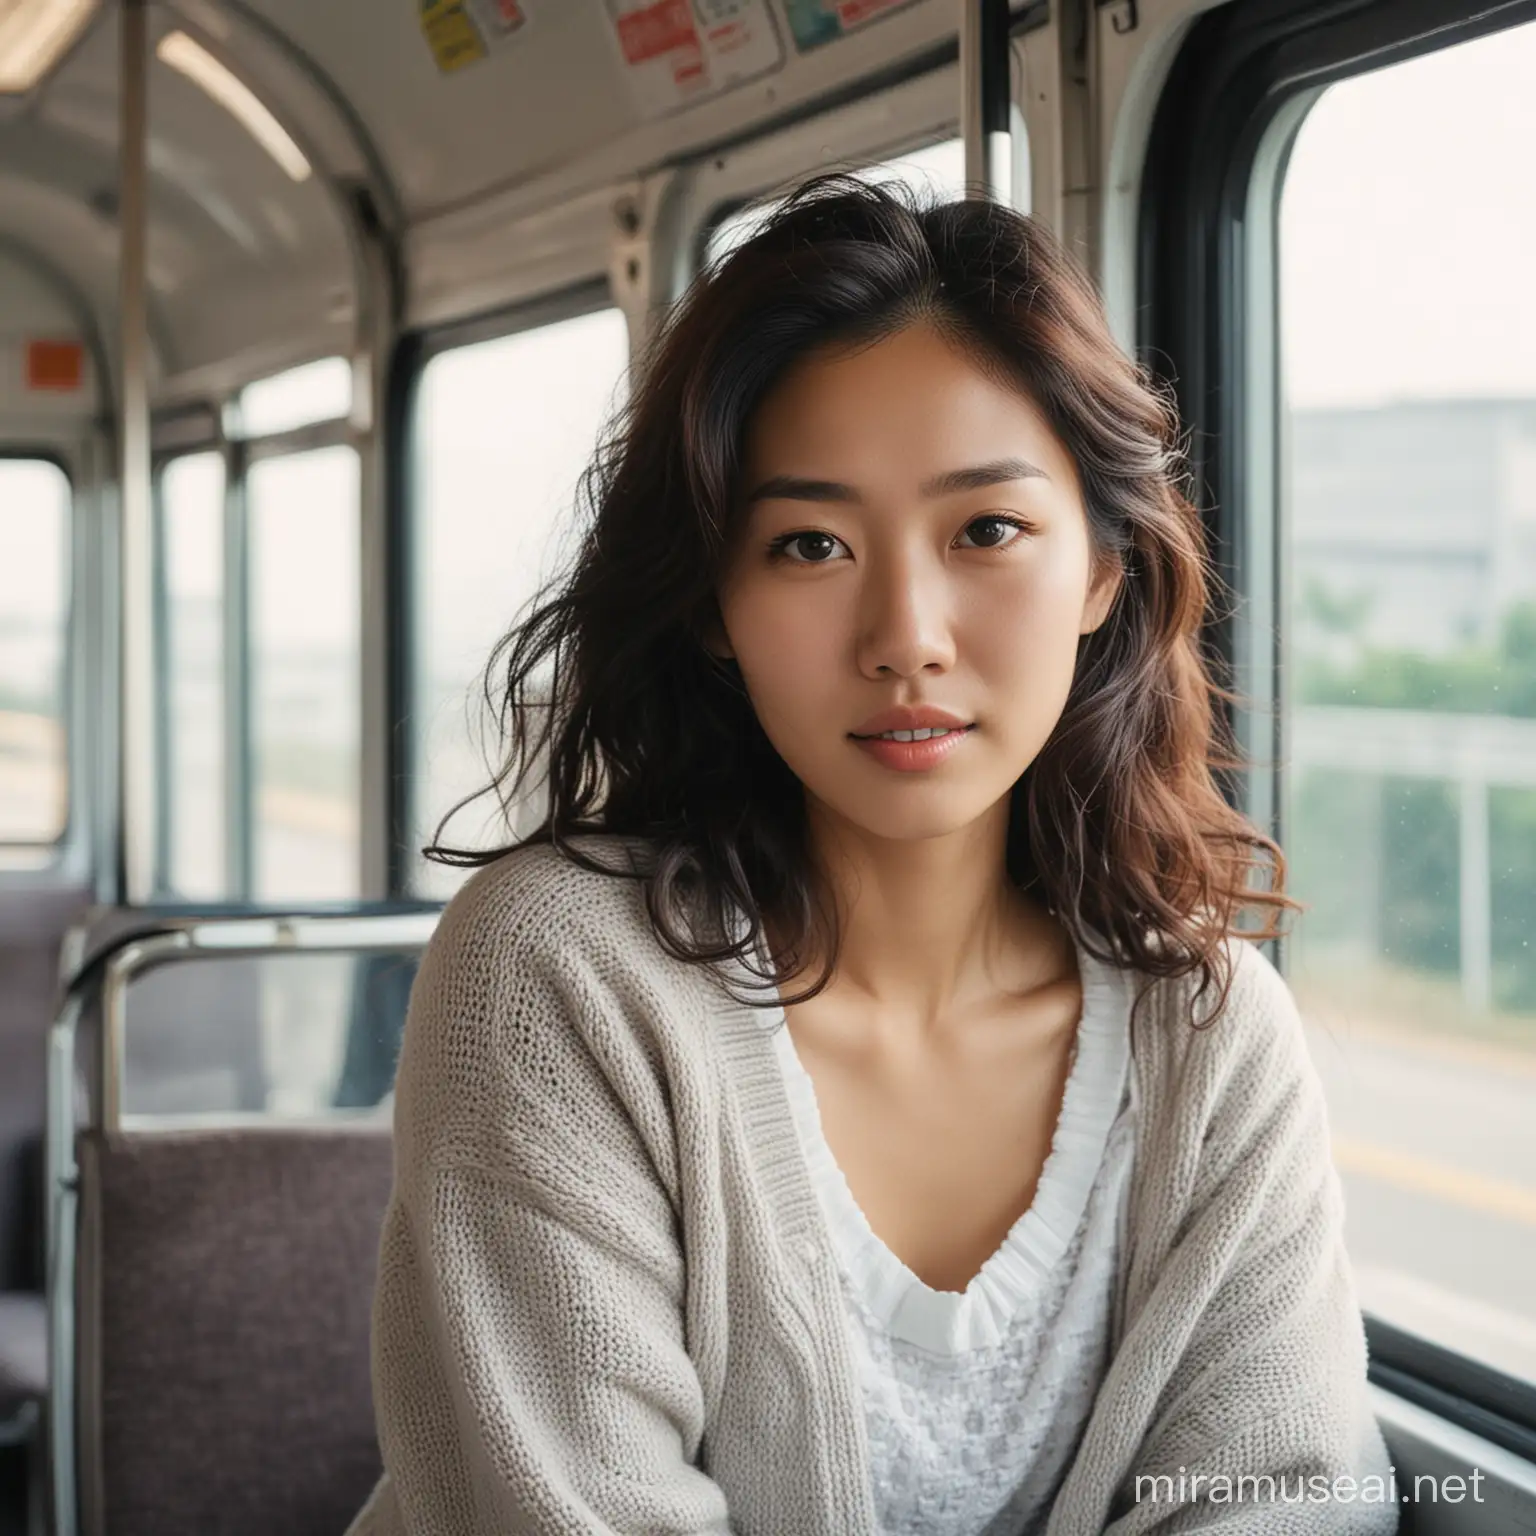 Asian Woman with Wavy Hair in Knit Clothing Sitting Inside Bus in Morning